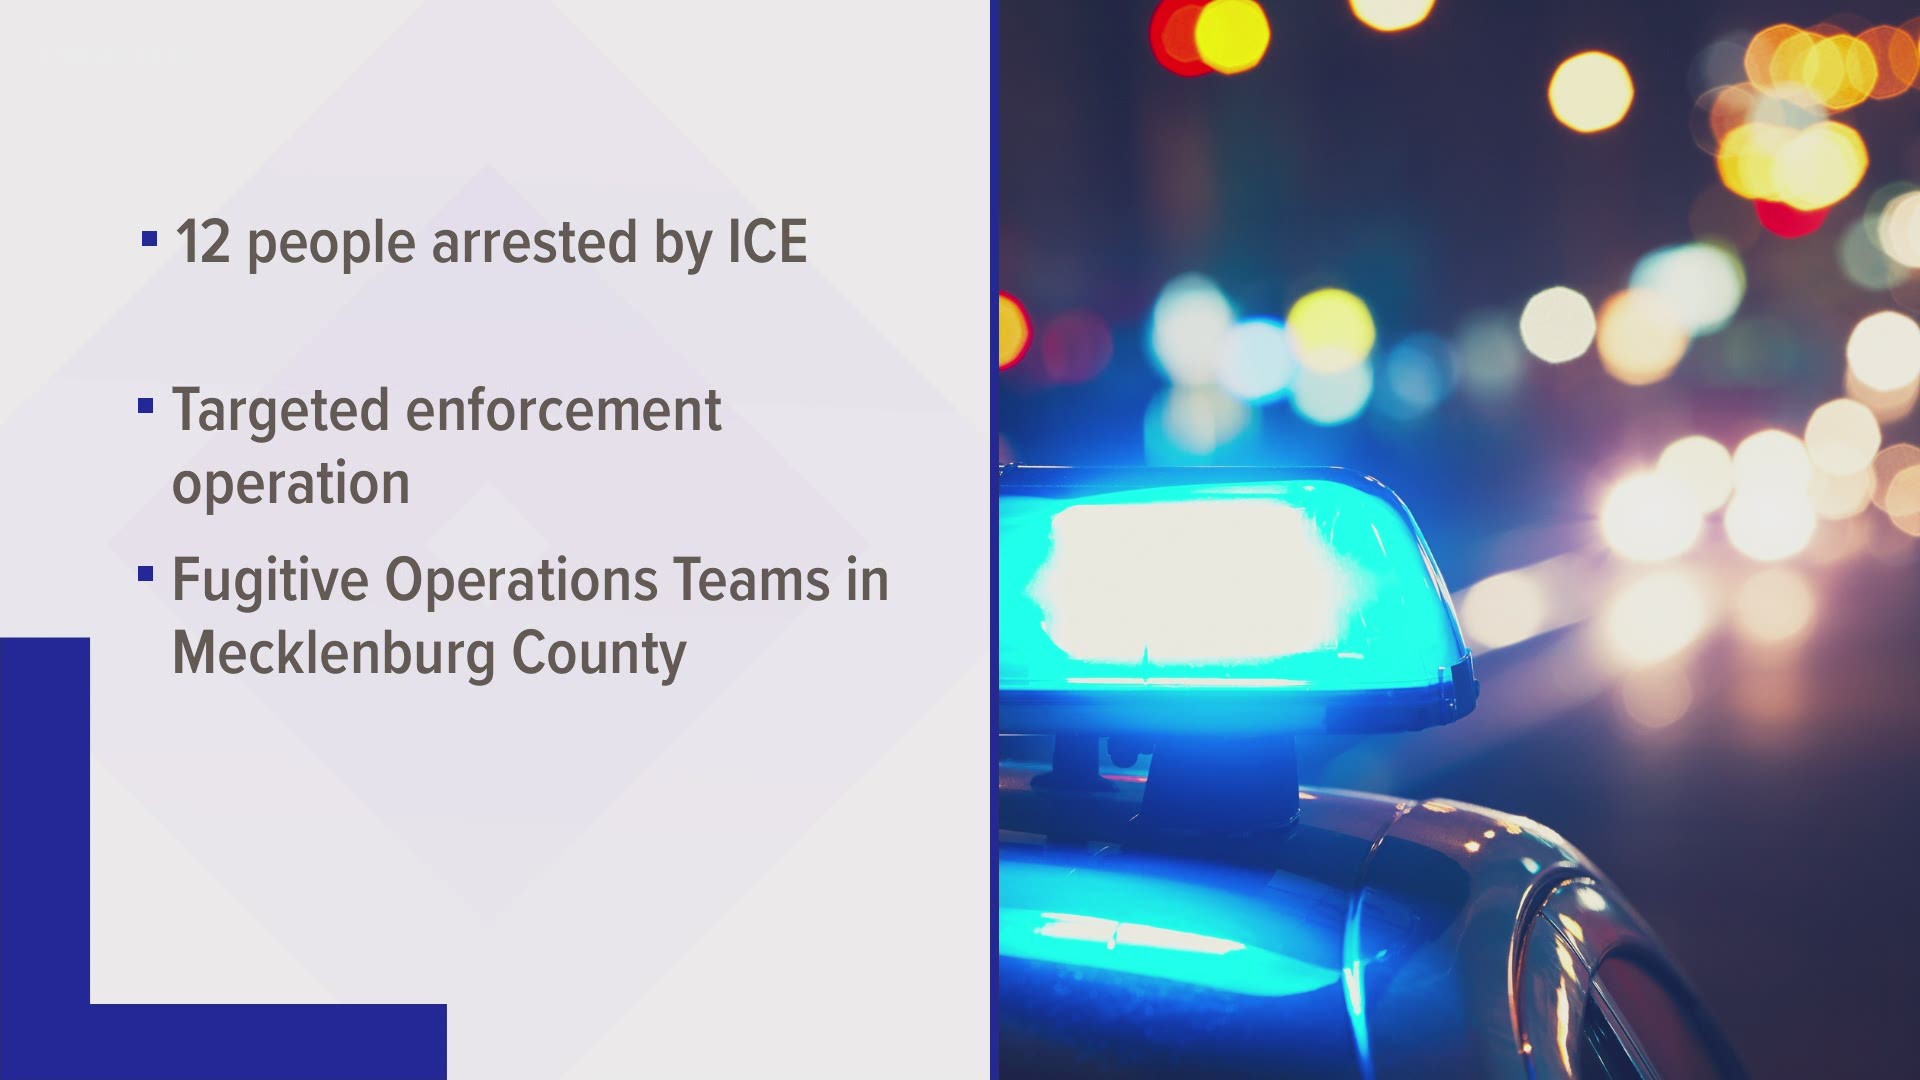 The arrests were part of a targeted enforcement operation by ICE's fugitive operations team in Mecklenburg County.